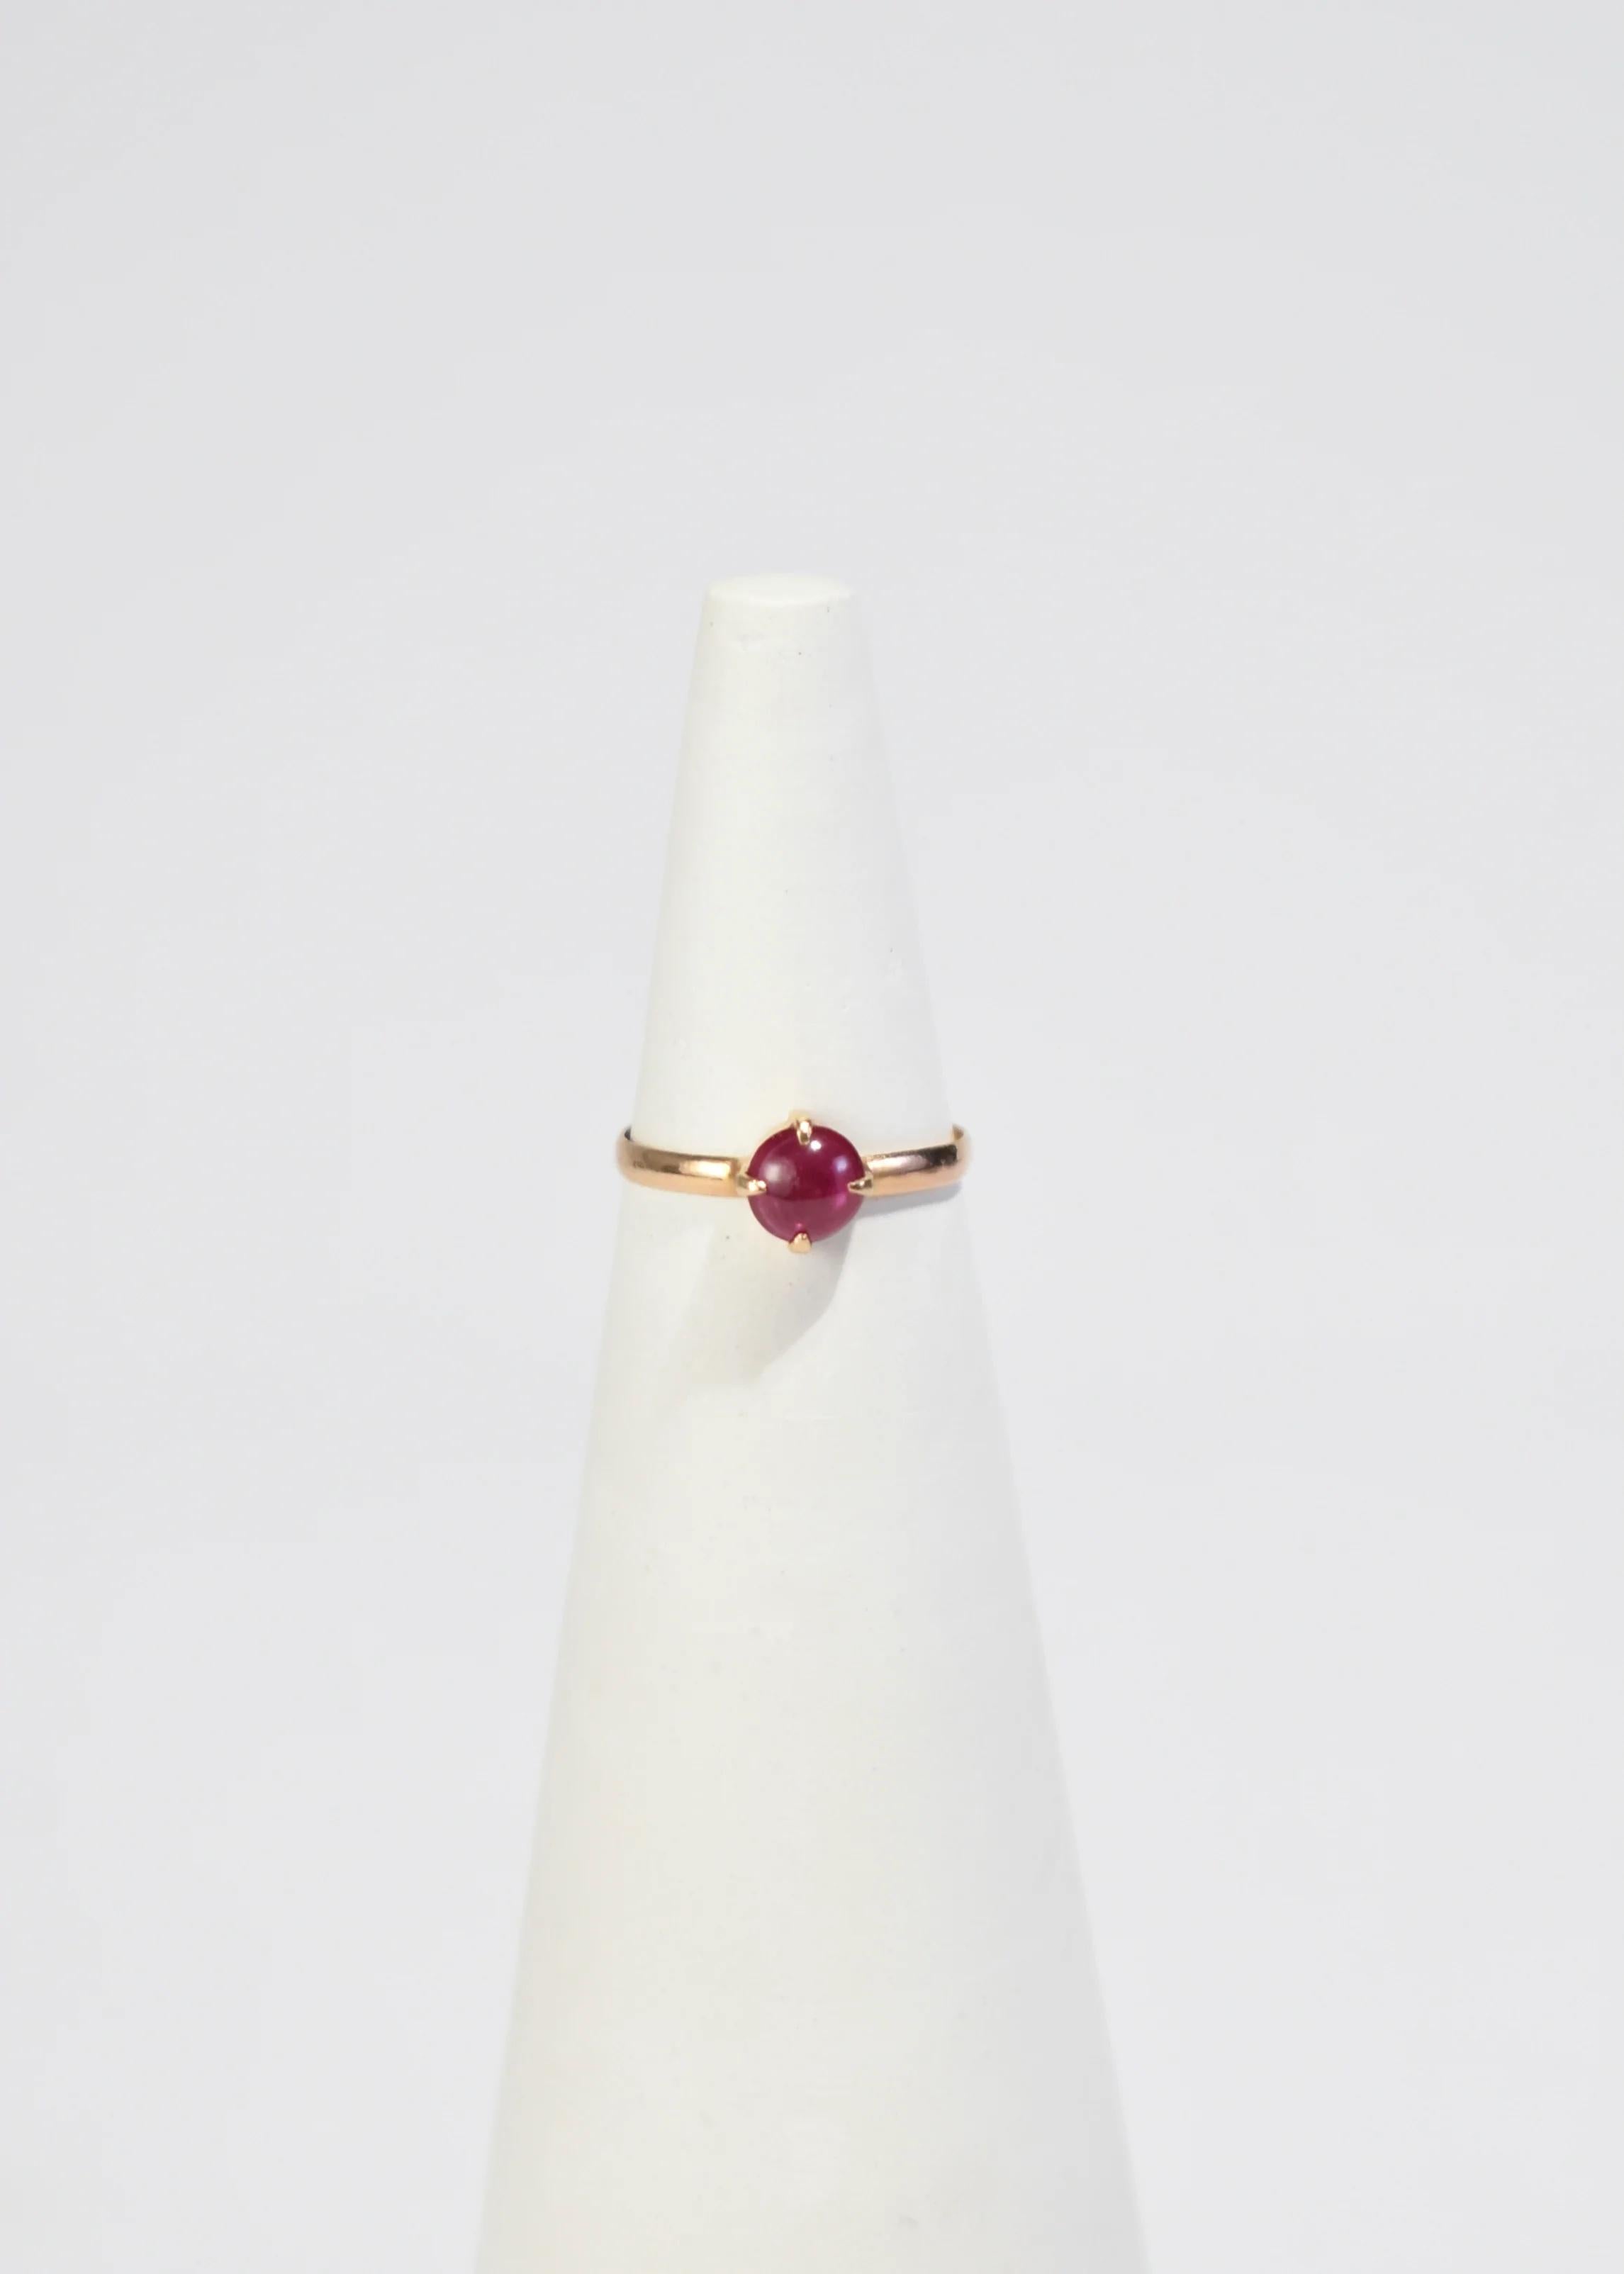 Stunning vintage 18k gold ring with round ruby detail, perfect size to fit a pinky. 

Material: 18k gold, ruby.